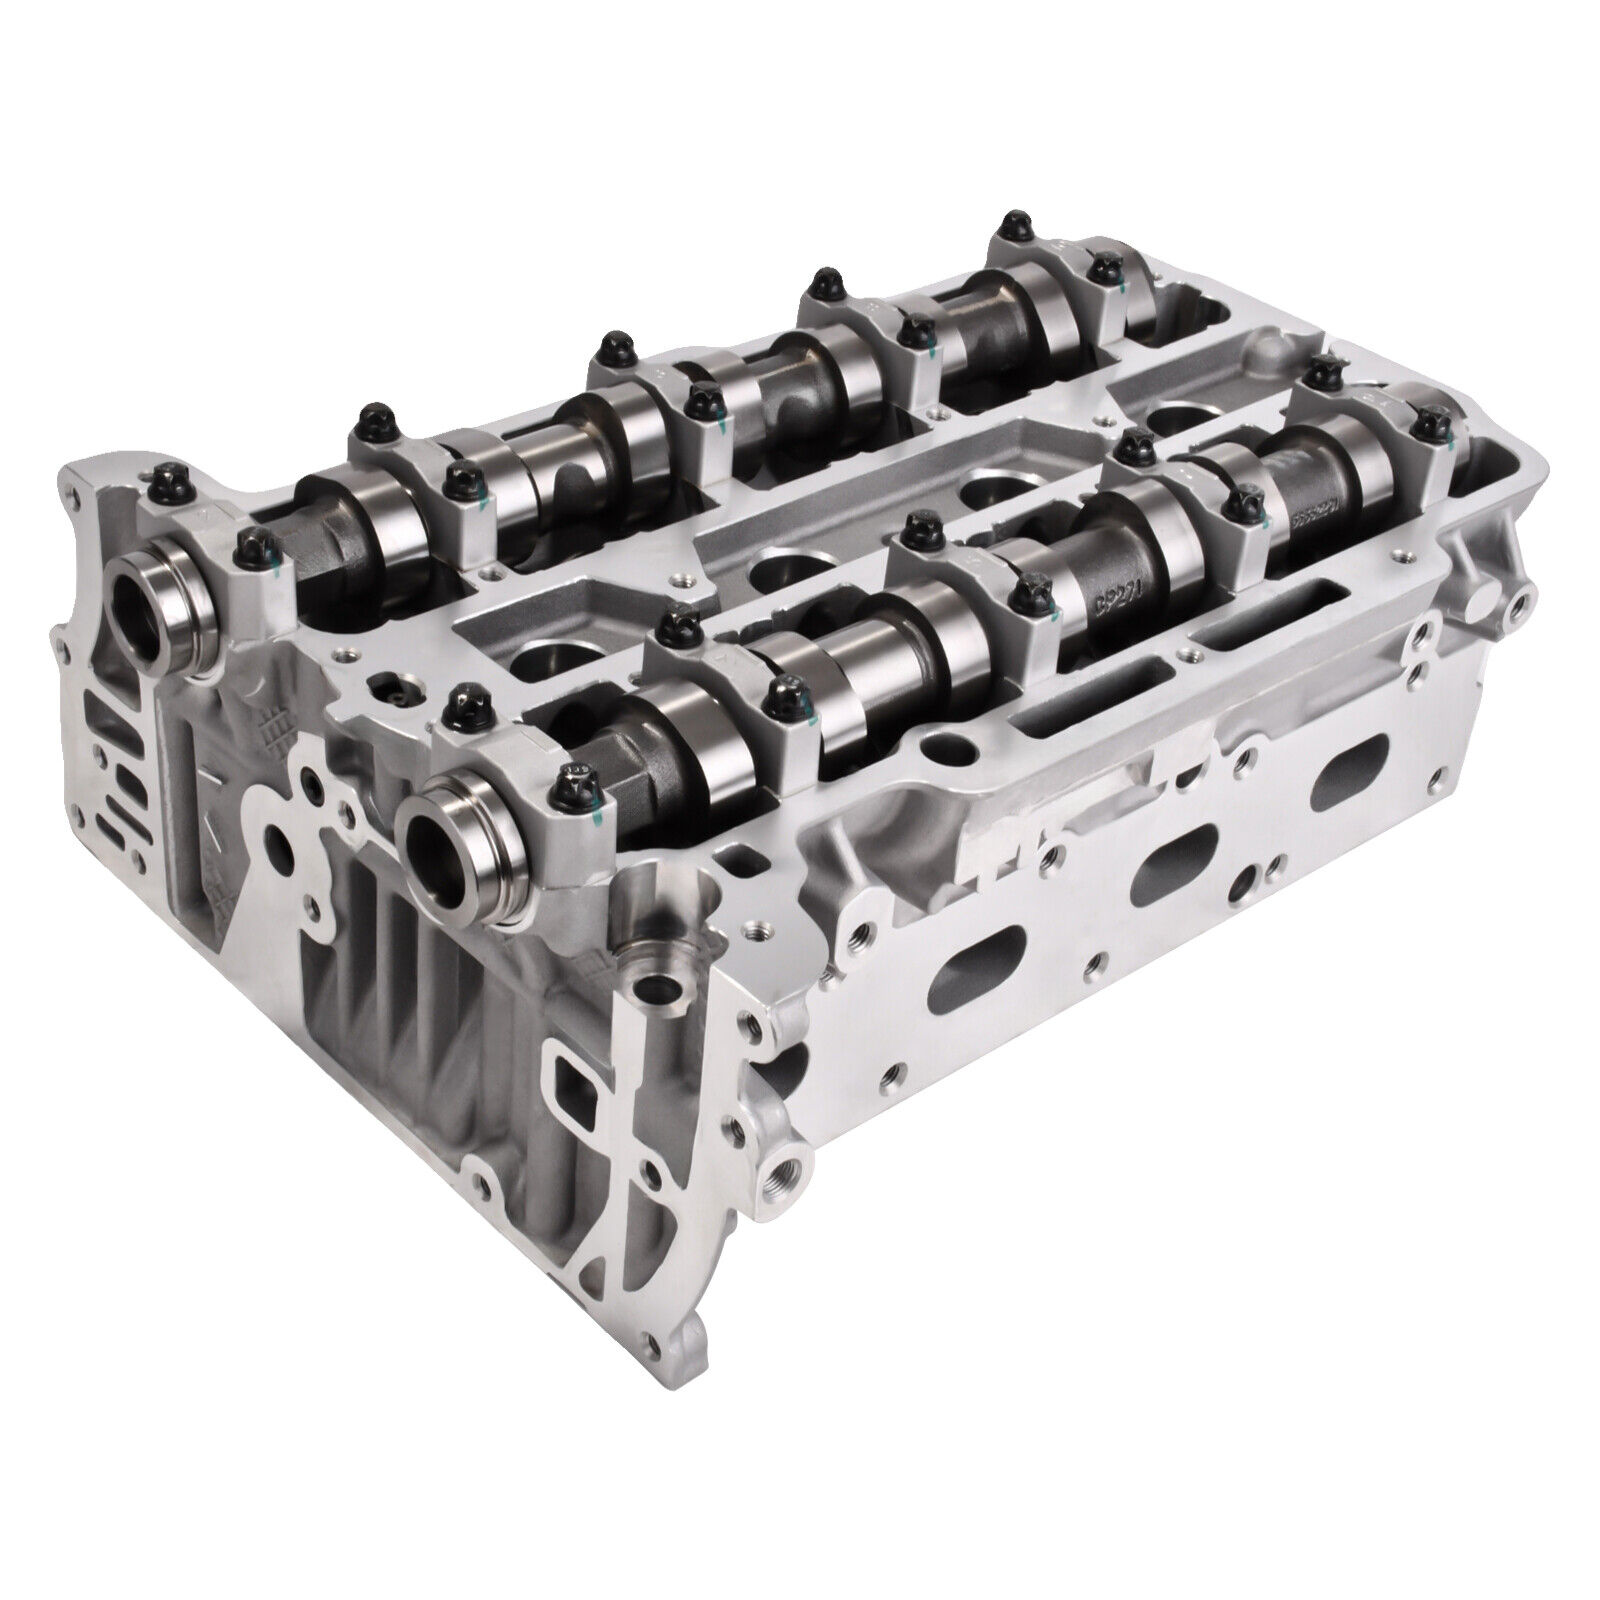 For Chevrolet Cruze Sonic Encore Trax 1.4L Turbo Cylinder Head Assembly 55573669